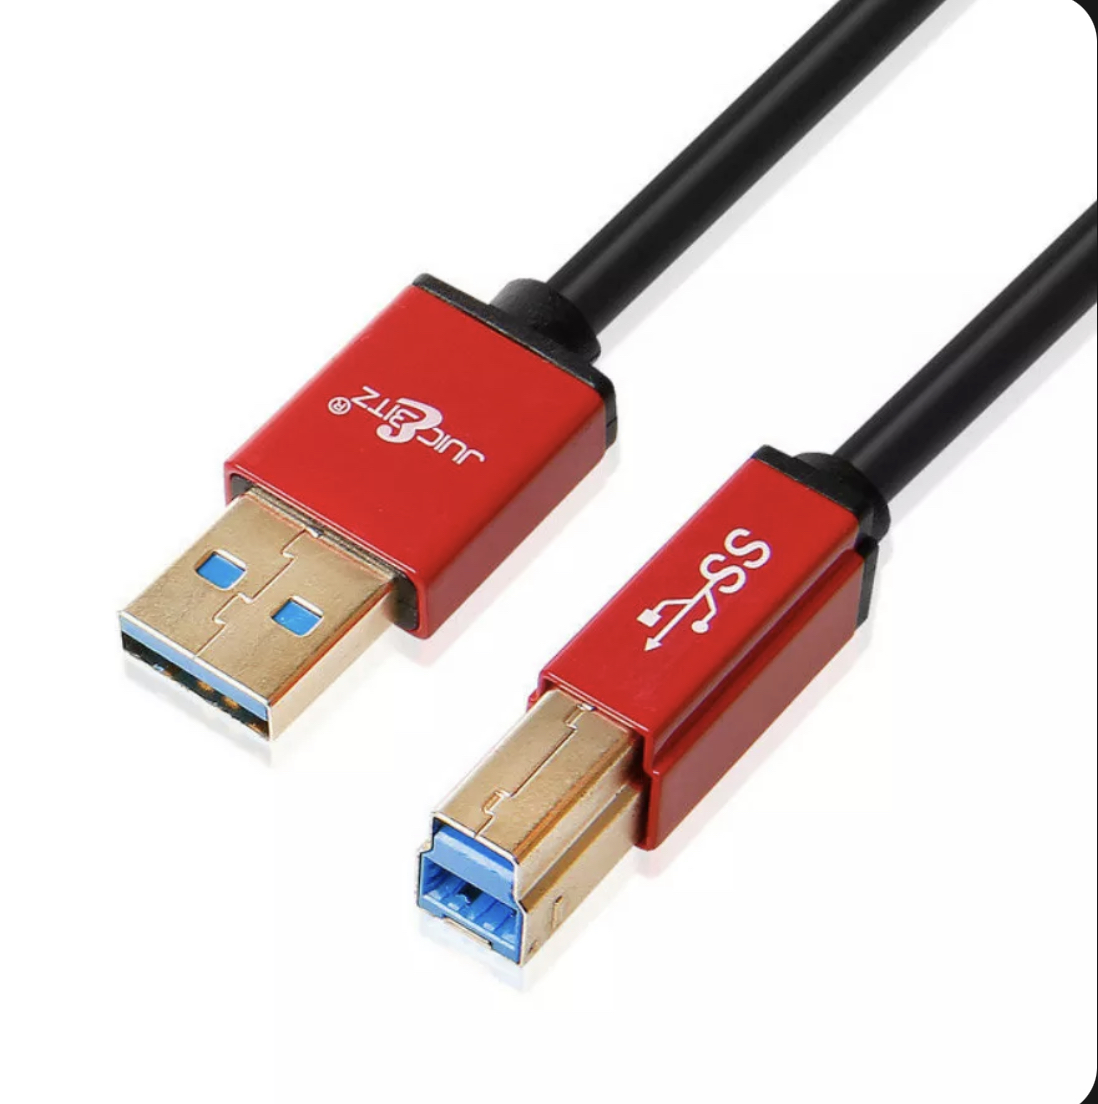 Premium 1/2 mtr USB 3.0 Shielded USB Type A to B Cable